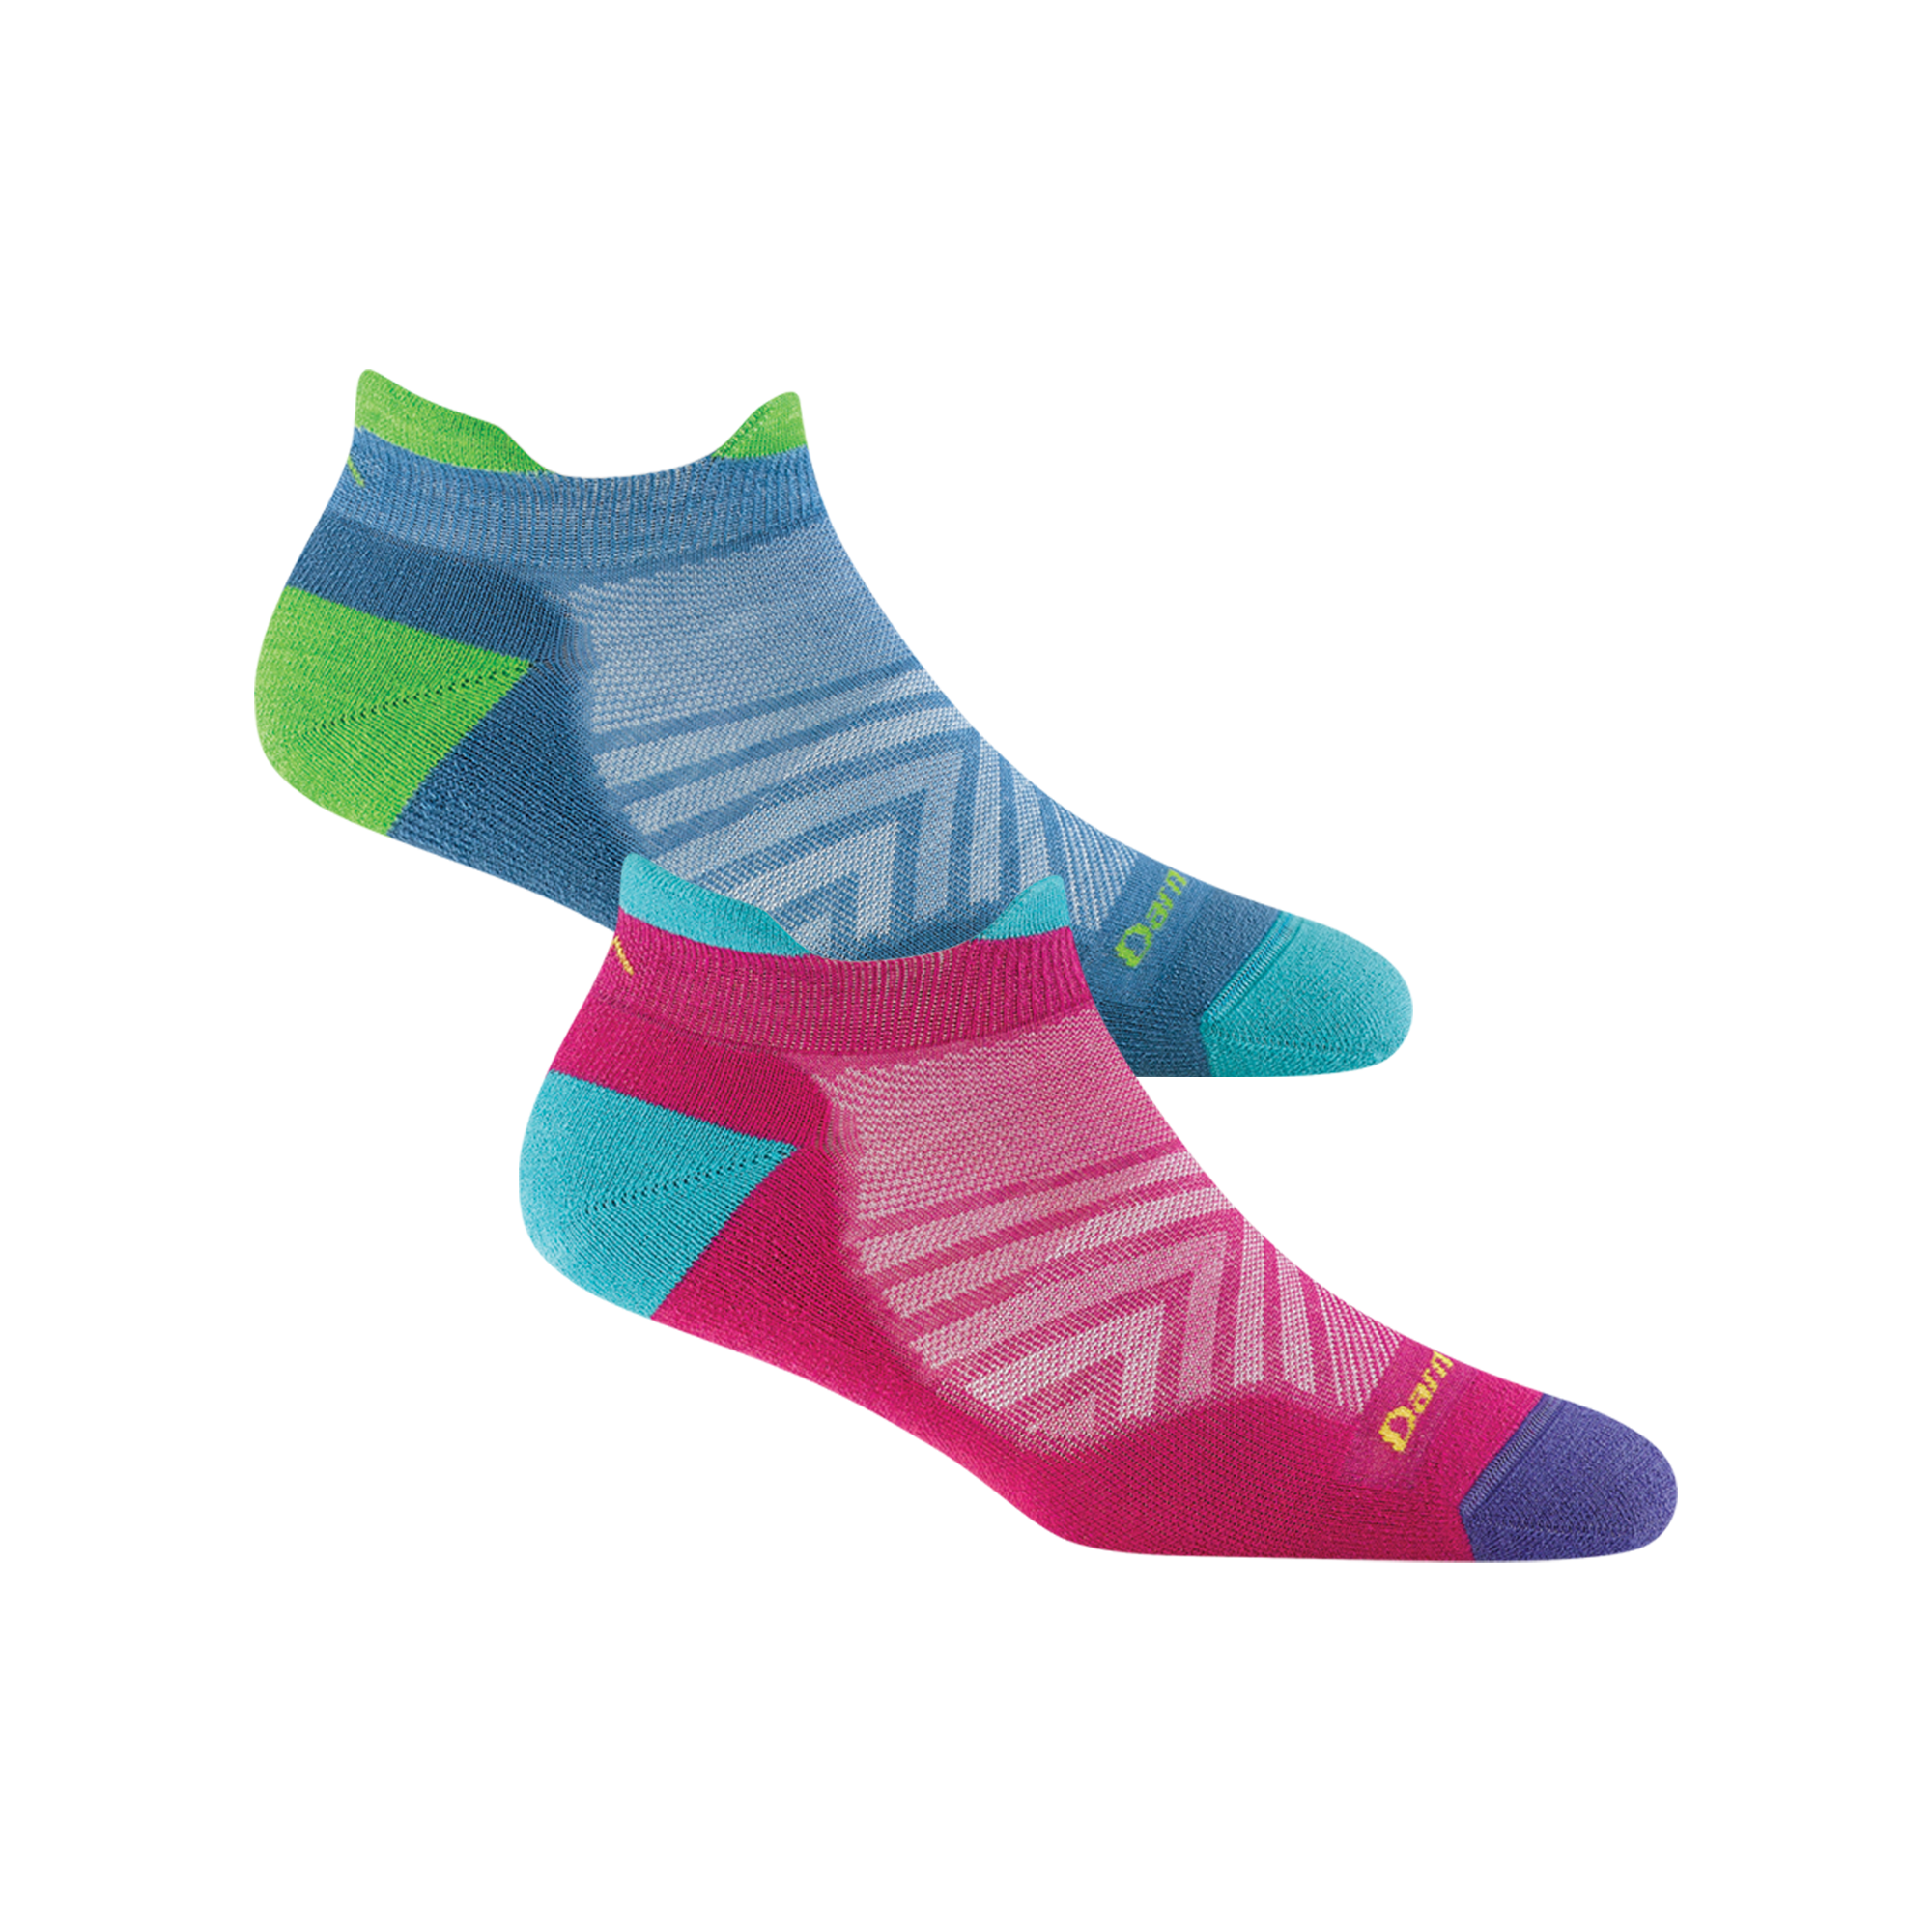 2 pack bundle including 2 pairs of the women's limited edition no show tab running socks in Boysenberry pink and Surf Blue